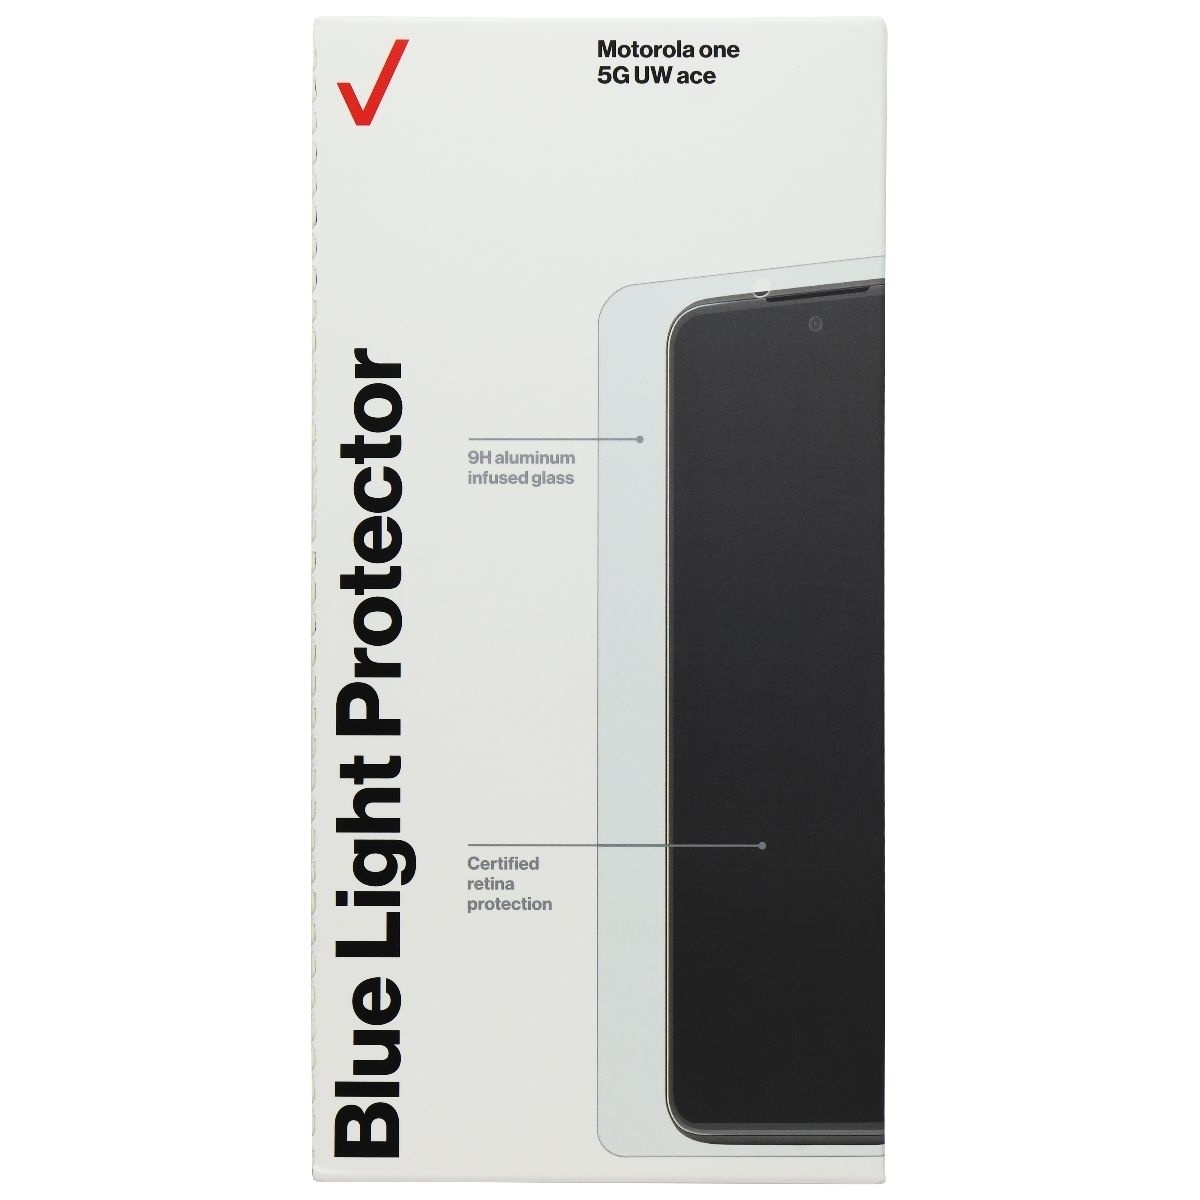 Verizon Blue Light Screen Protector For Motorola One 5G UW Ace - Clear/Tinted